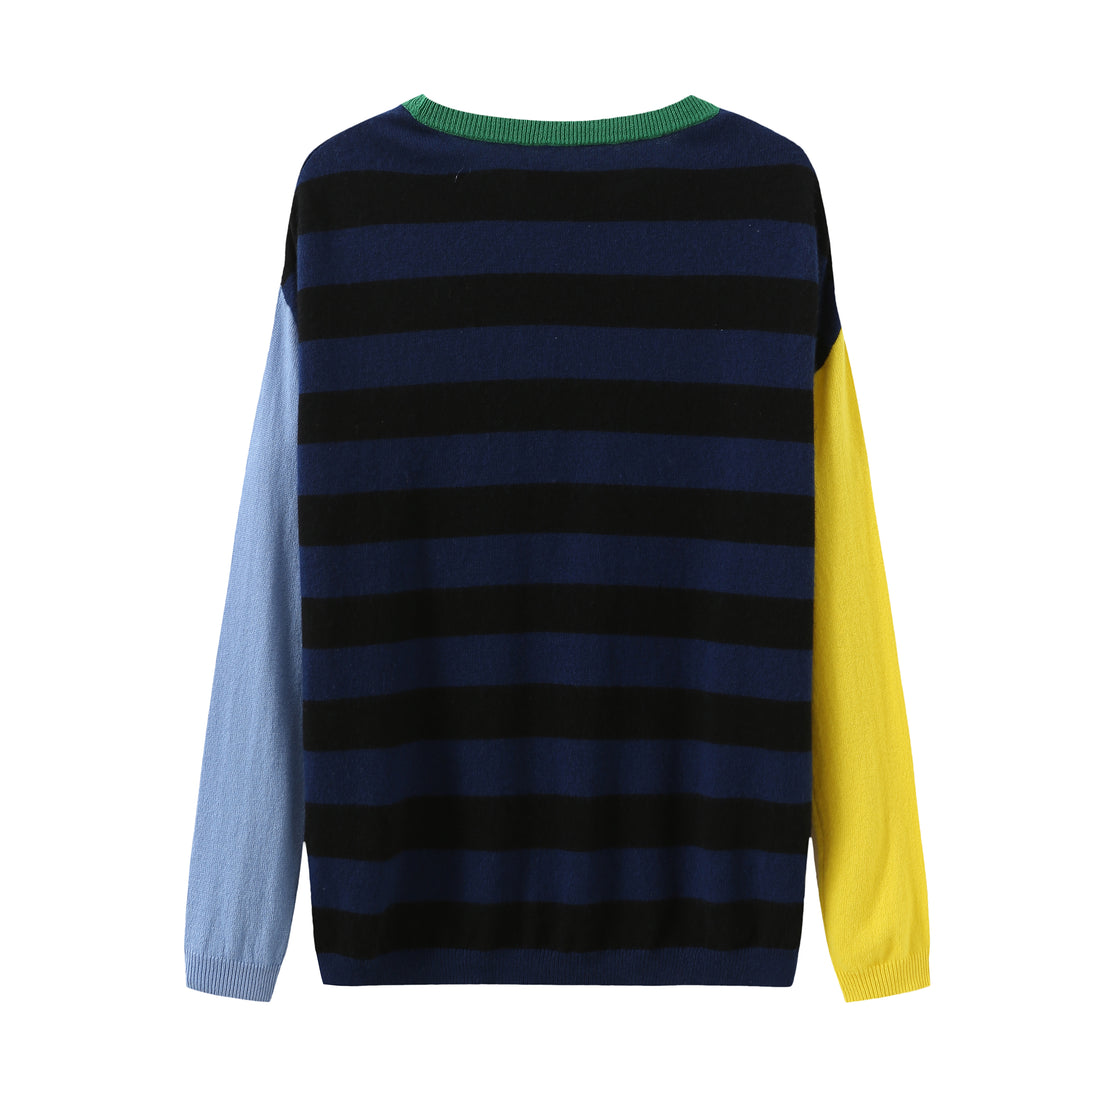 Opposite Ends / Wool Cashmere-Blend Sweater • Yellow/ Light Blue